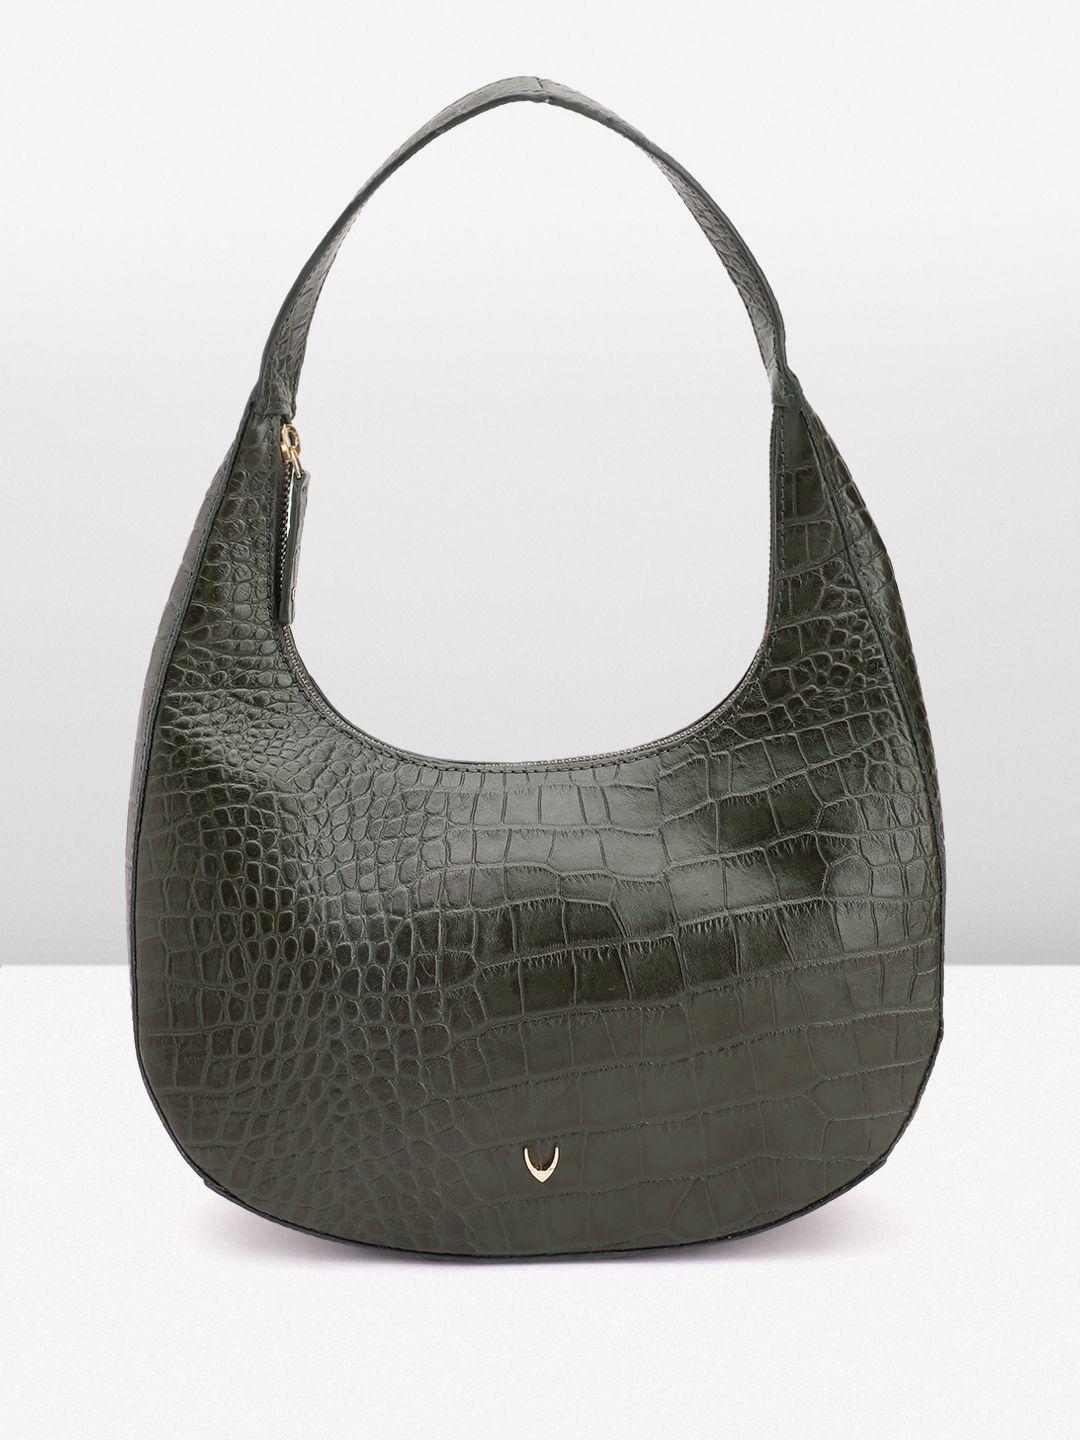 hidesign textured leather structured baguette bag